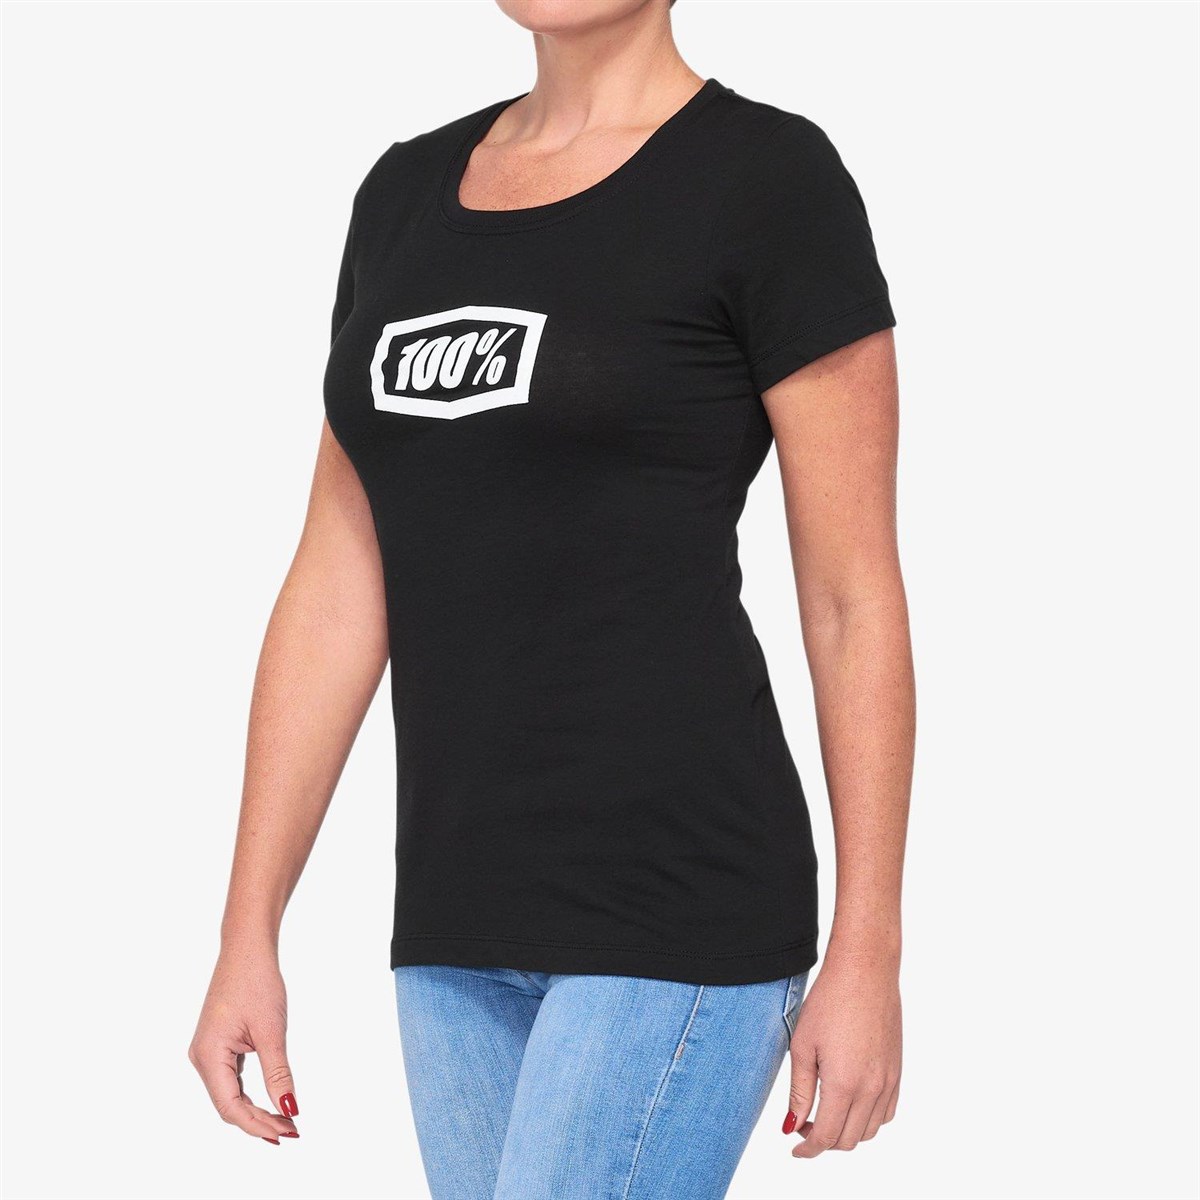 100% Essential Womens Short Sleeve T-Shirt product image